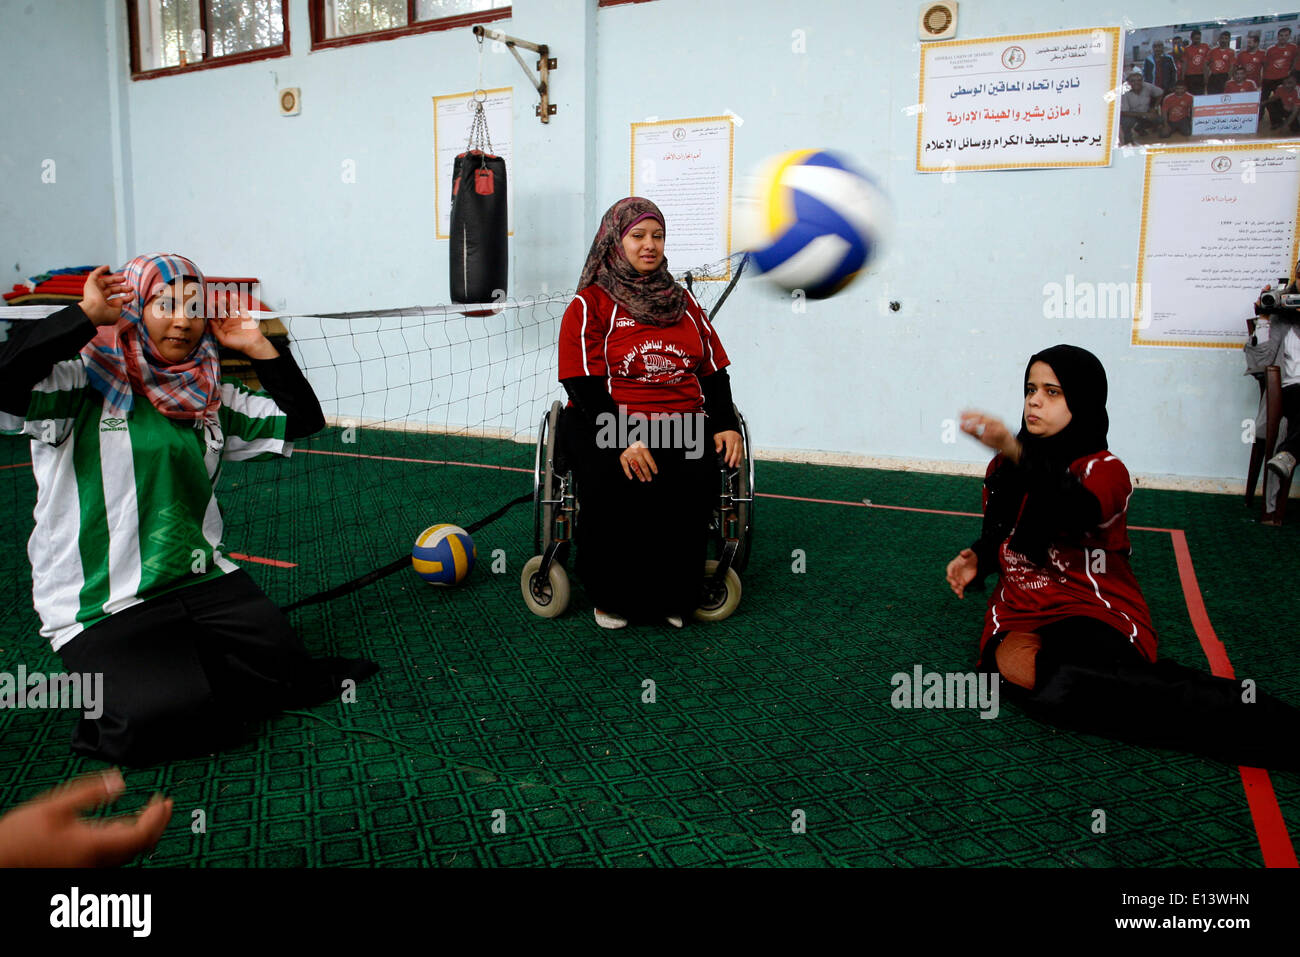 DEIR Al-BAlAH, PALESTINE - MAY 21: Disabled Palestinian volleyball of Women's a participates in Exercise a in Club Deir al-Balah in the central Gaza Strip on May 21, 2014. (Photo by Abed Rahim Khatib /Pacific Press) Stock Photo